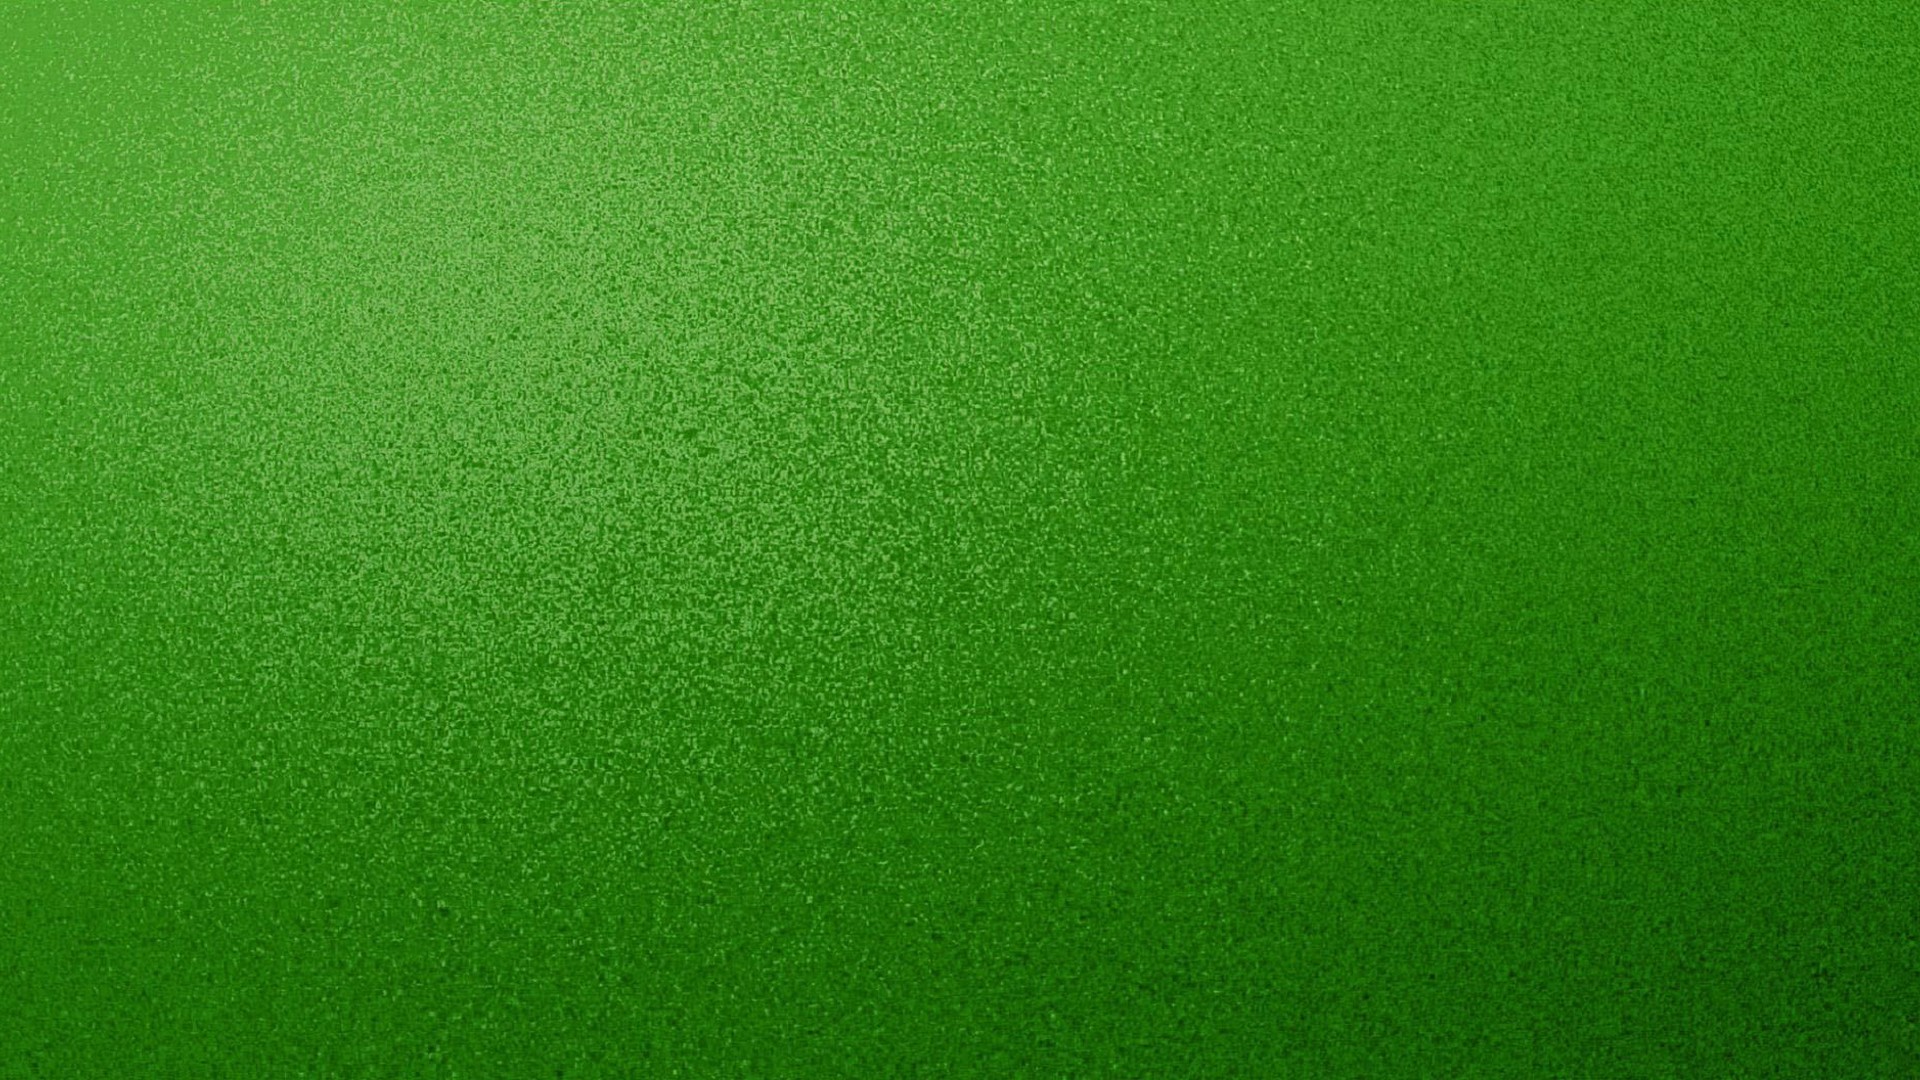 Green Wallpaper with image resolution 1920x1080 pixel. You can use this wallpaper as background for your desktop Computer Screensavers, Android or iPhone smartphones